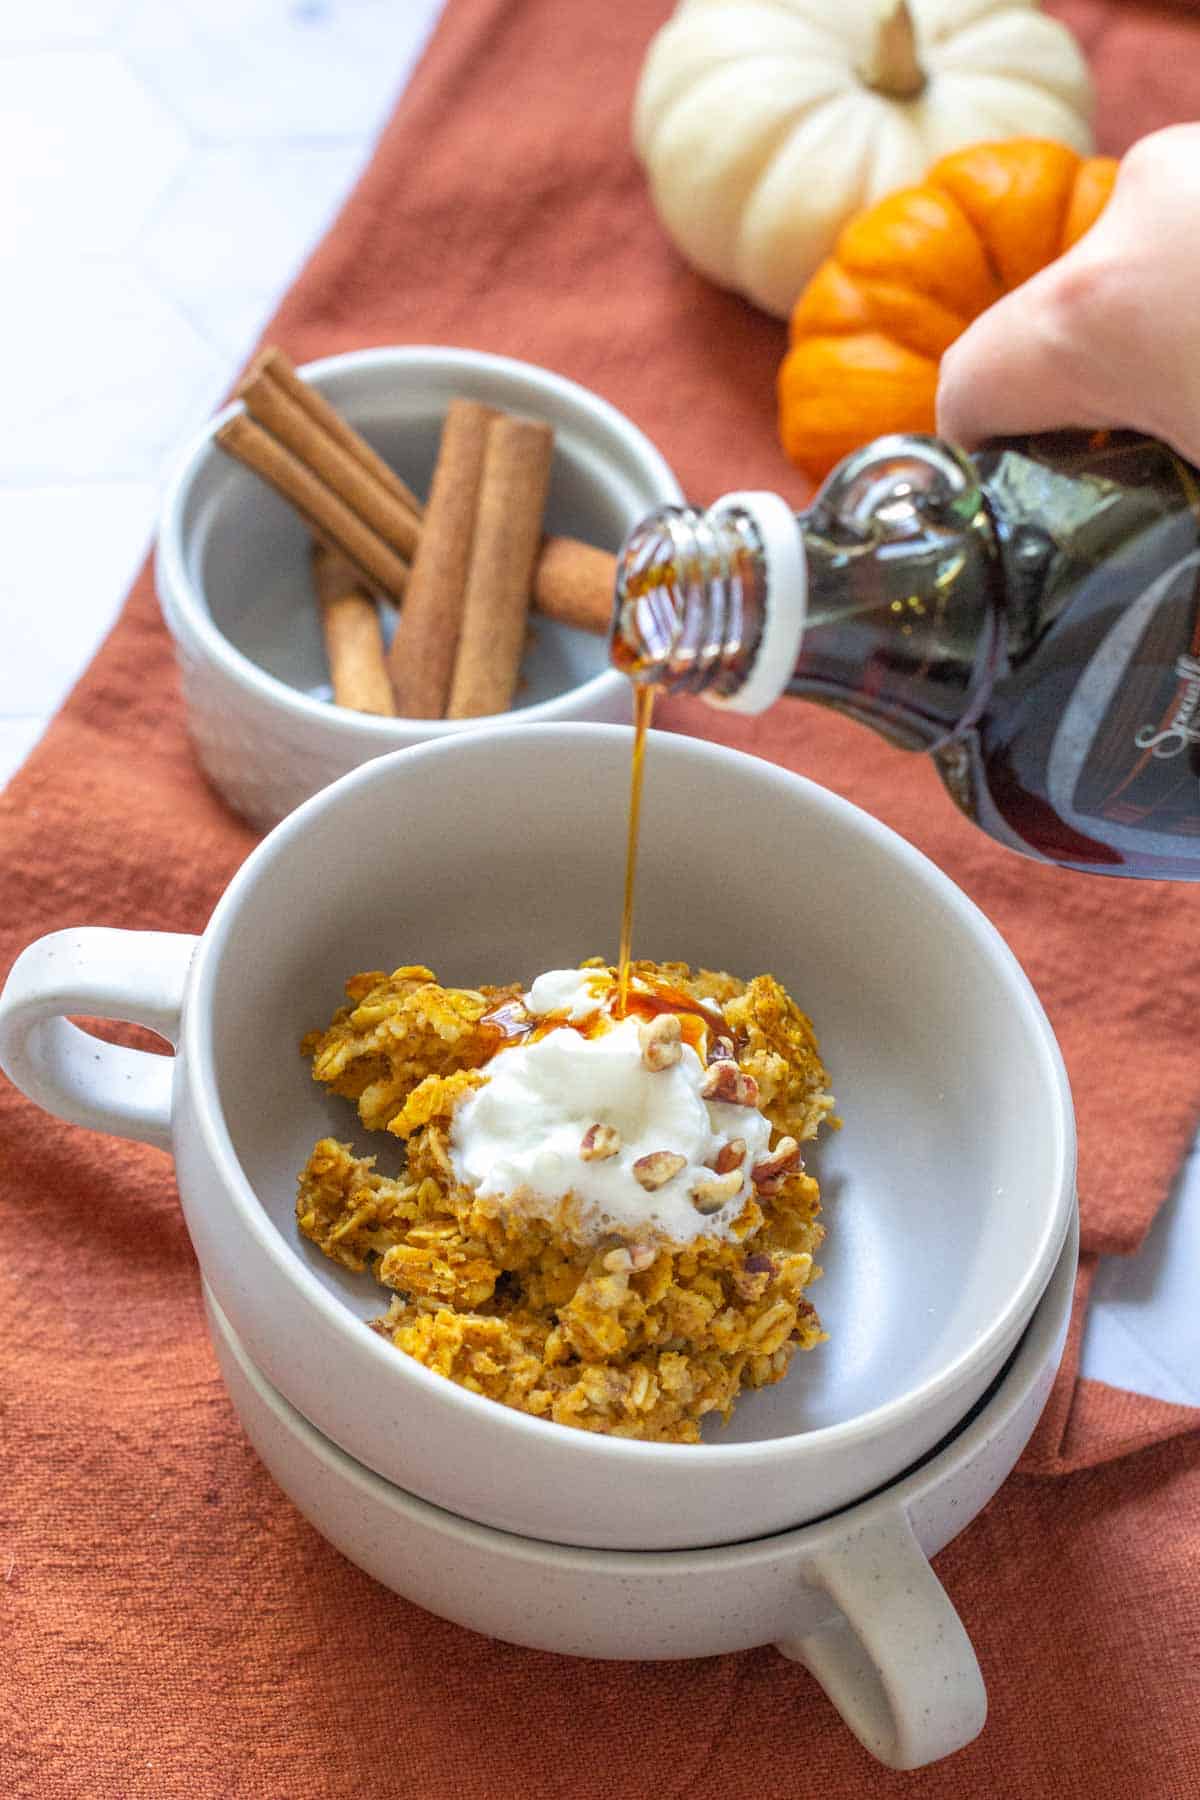 maple syrup being poured onto bowl of pumpkin baked oatmeal